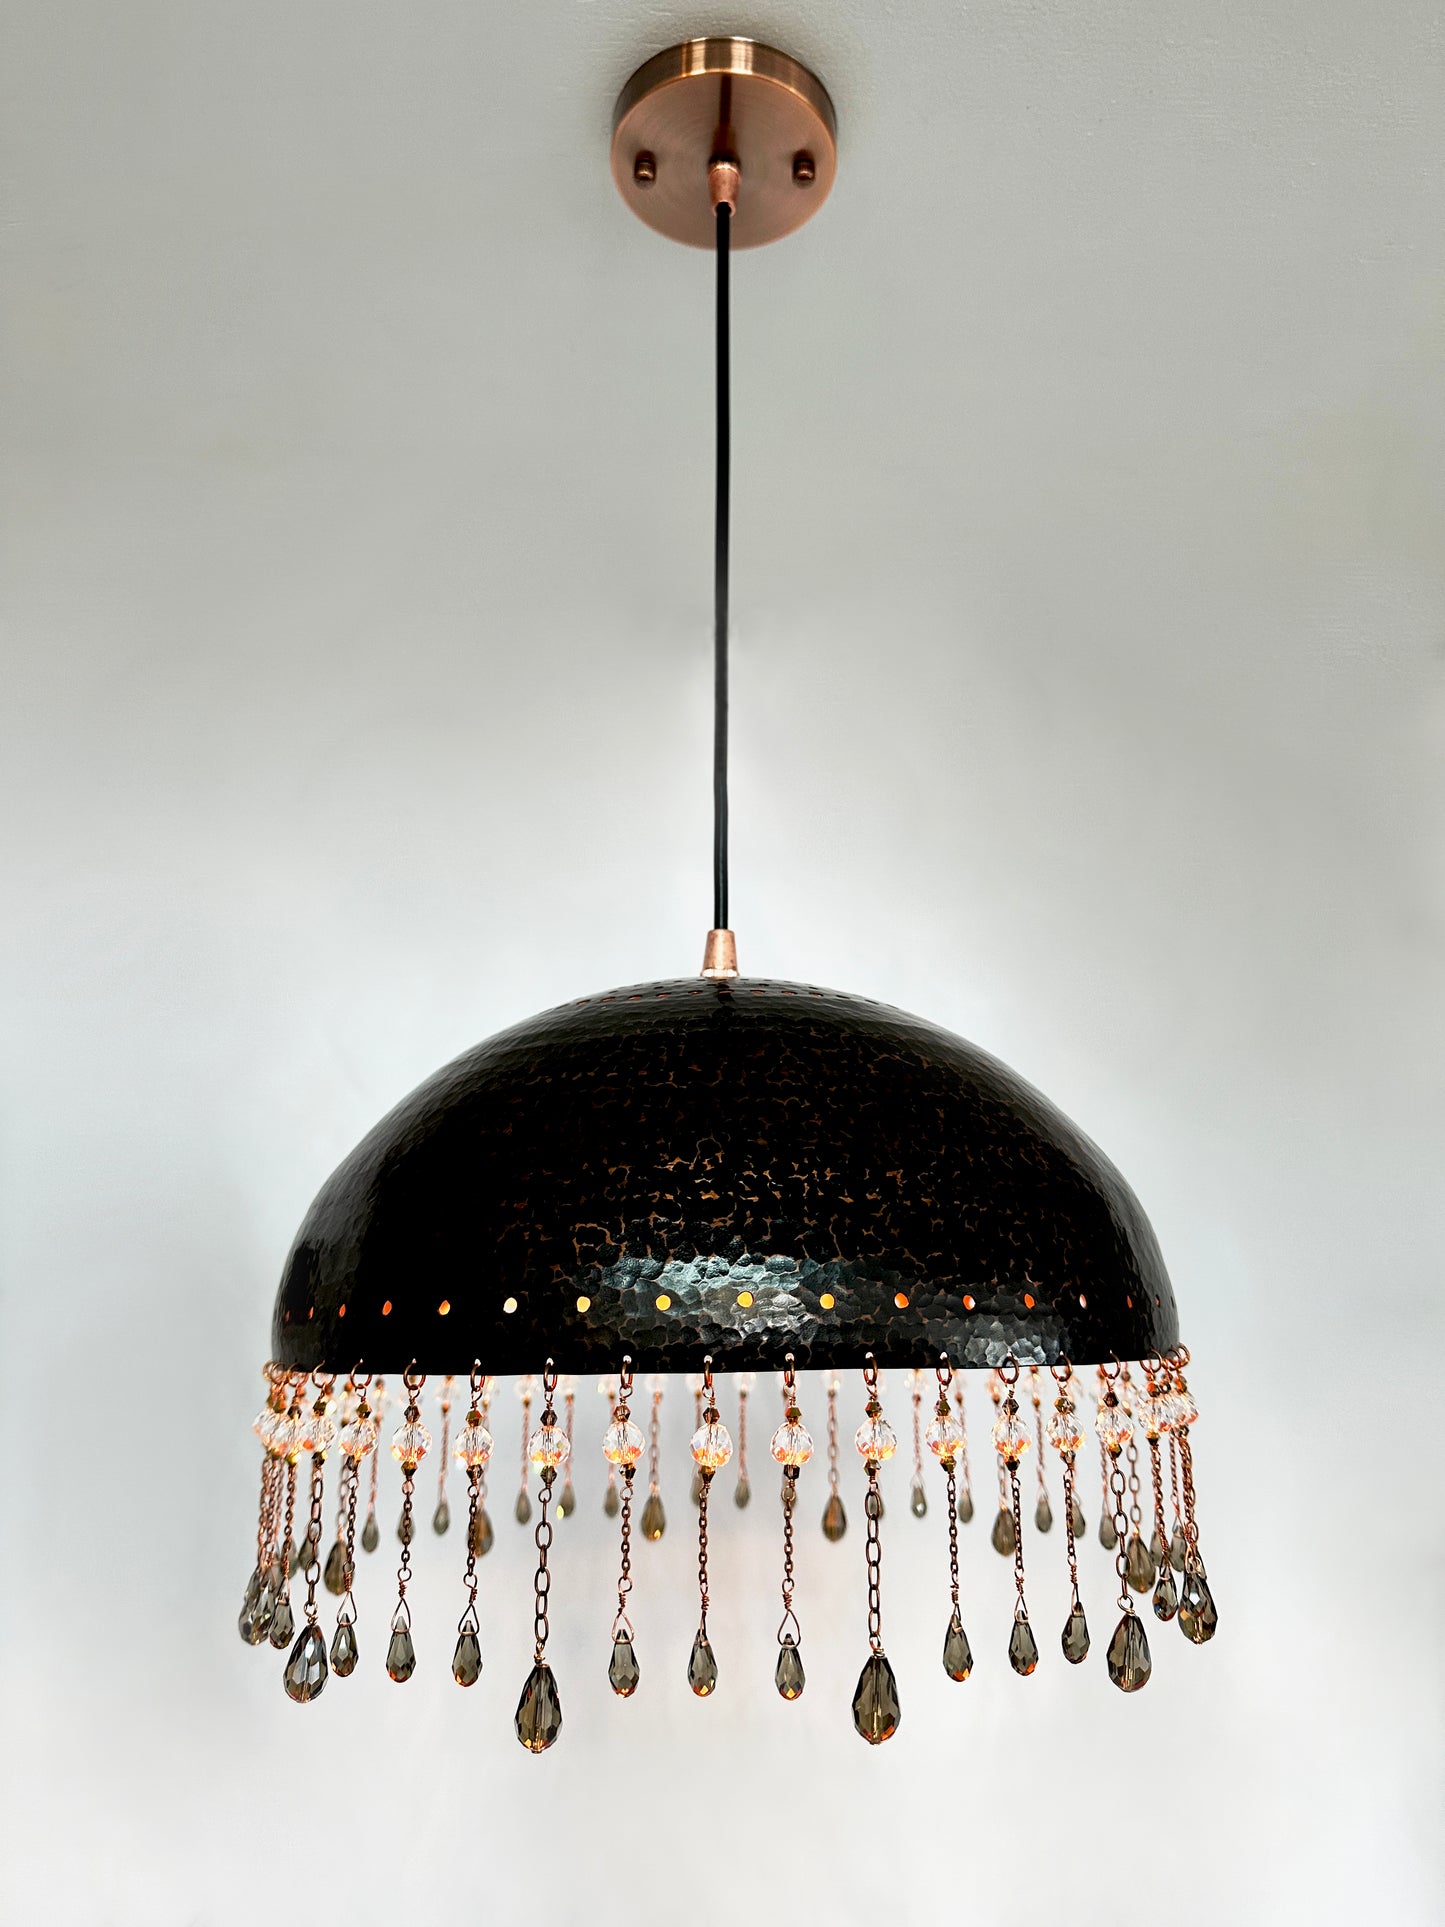 Antique Crackle/Shadow-Casting Crystal Pendant Lamp